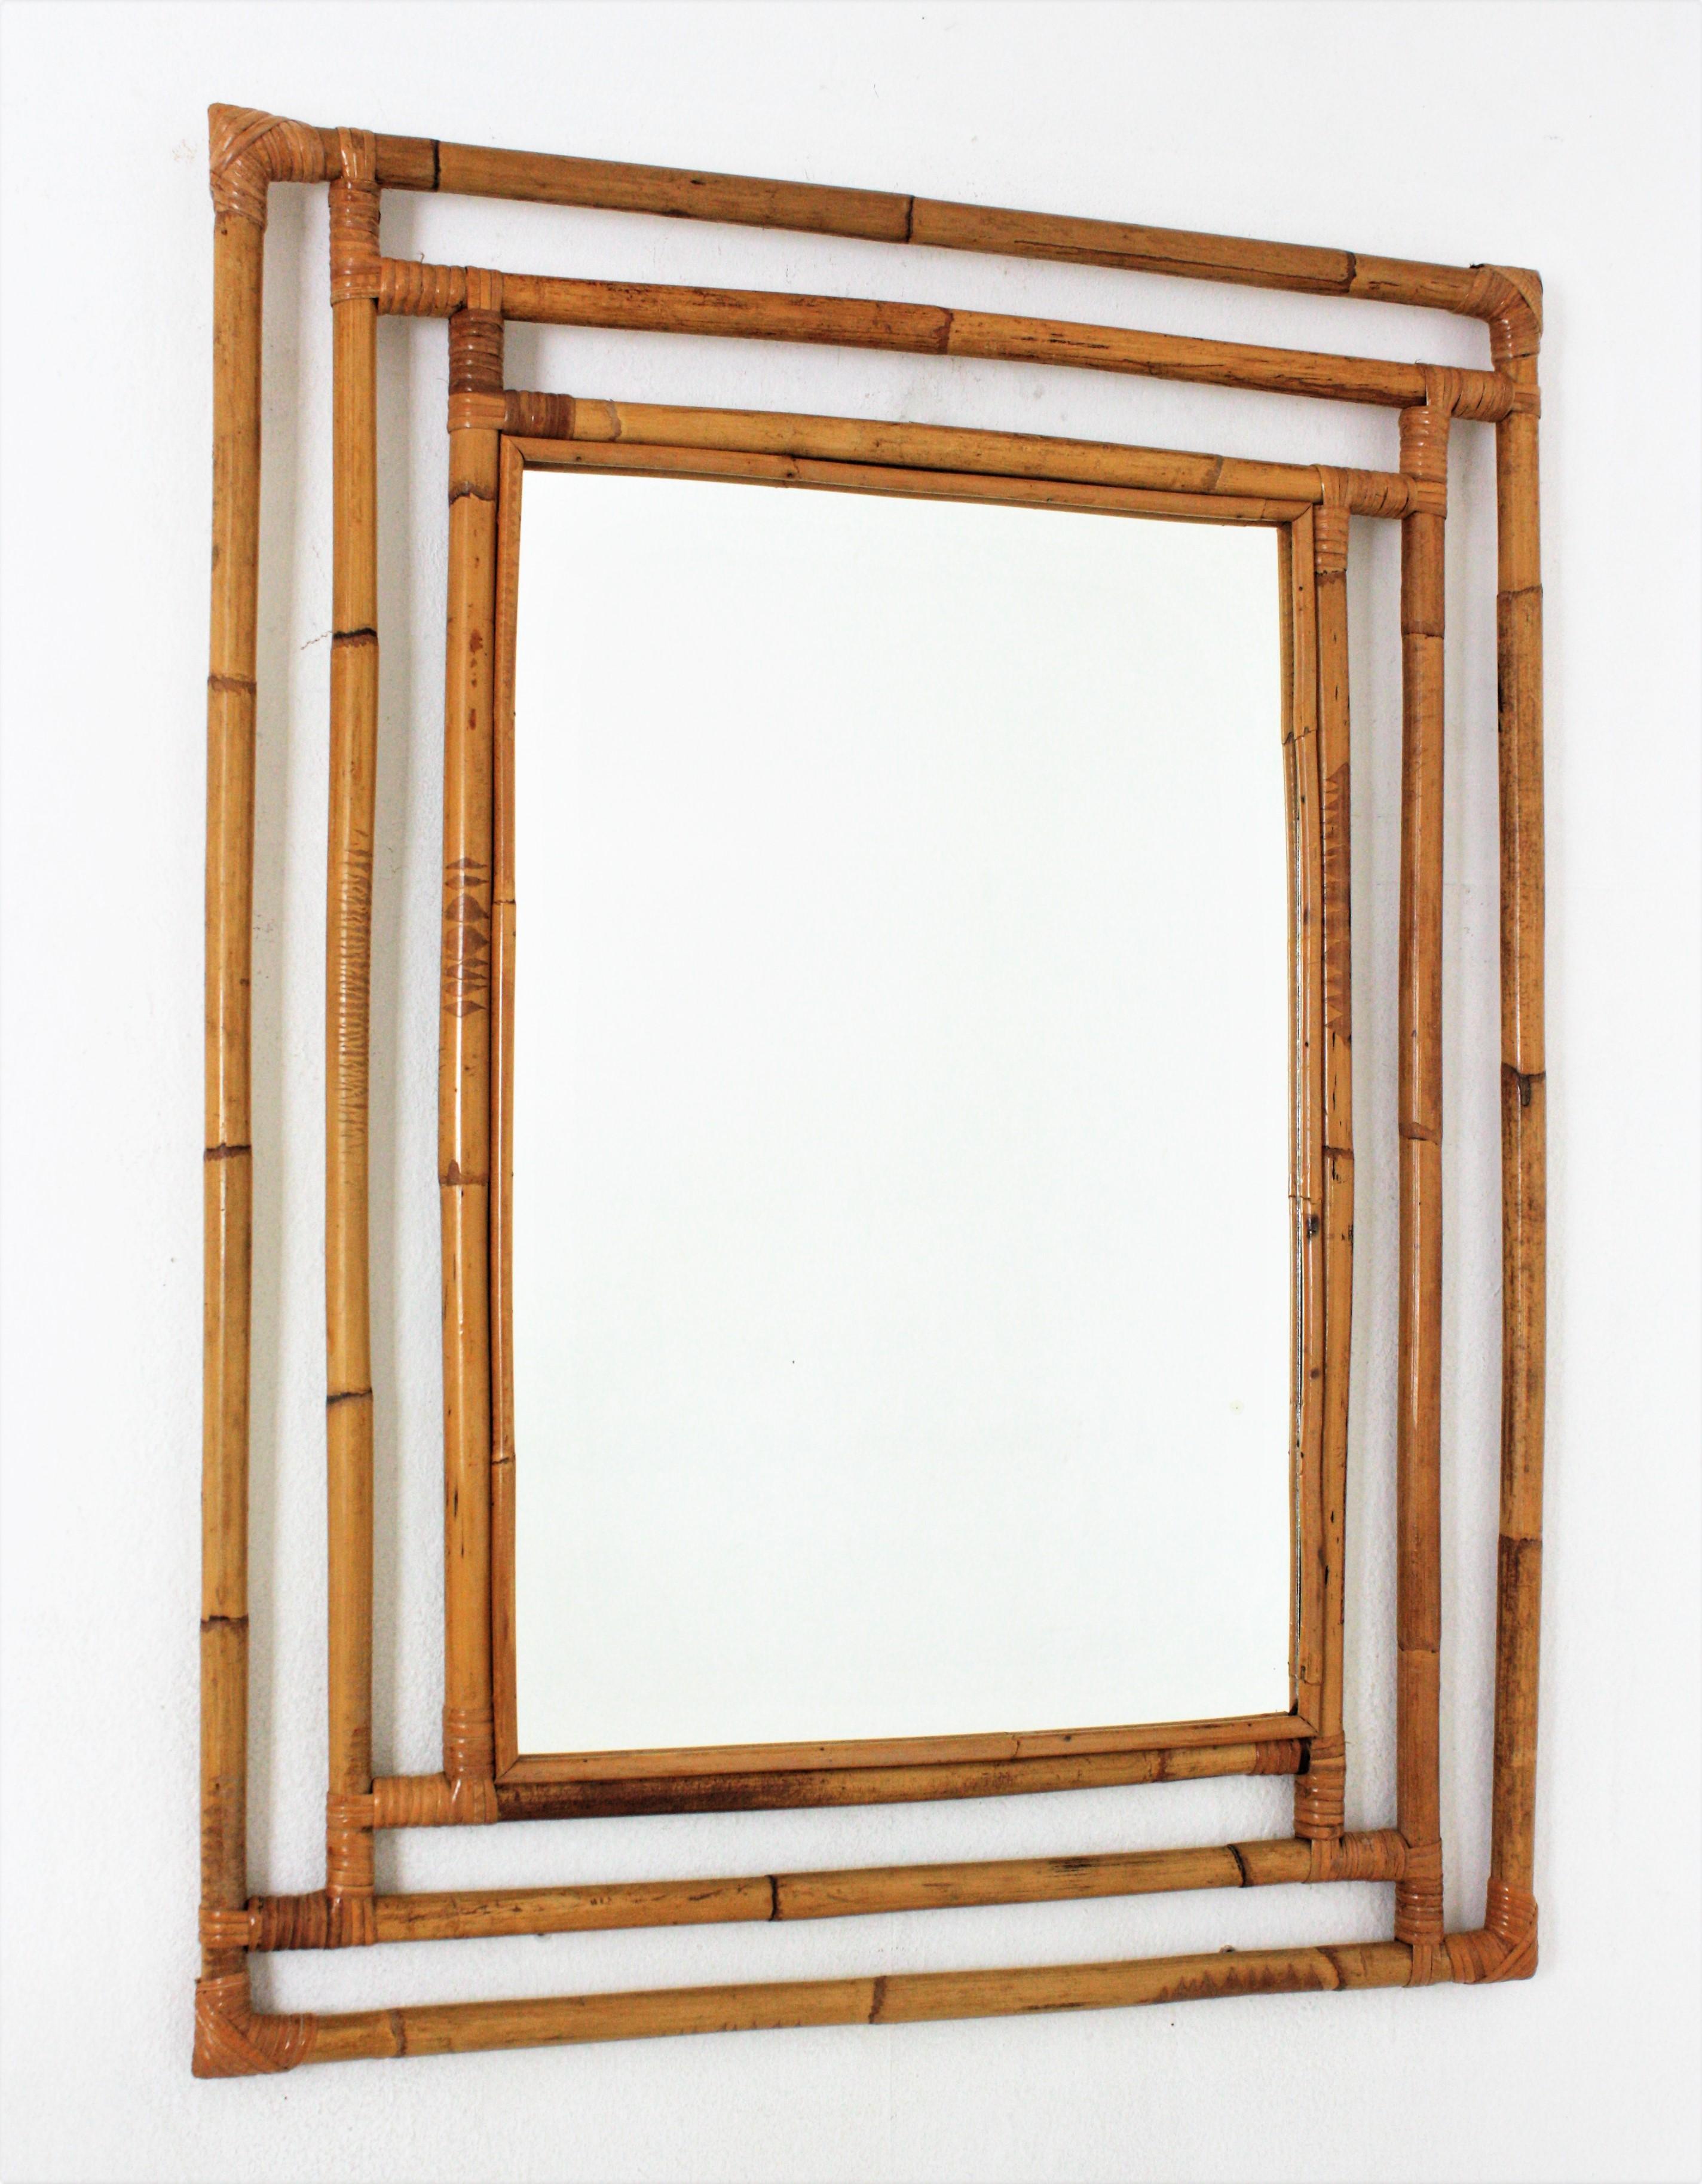 Gorgeous Tiki style rectangular mirror handcrafted with bamboo cane. Spain, 1960s.
Highly decorative handcrafted bamboo frame with geometric shapes, oriental accents and a large glass surface,
This mirror is in excellent vintage condition.
It